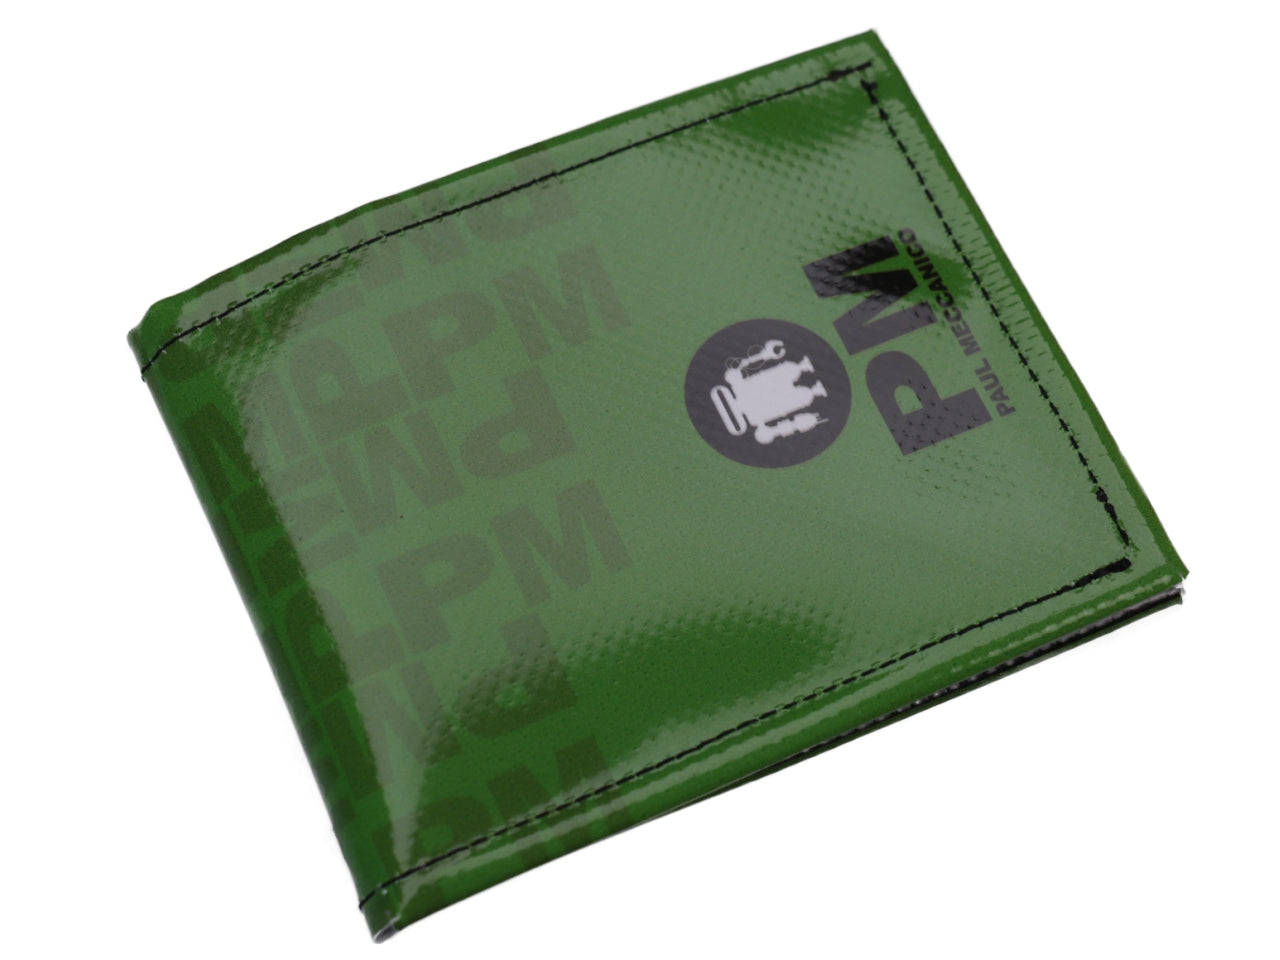 MEN'S WALLET GREEN WITH LETTERING FANTASY. MODEL CRIK MADE OF LORRY TARPAULIN. - Limited Edition Paul Meccanico